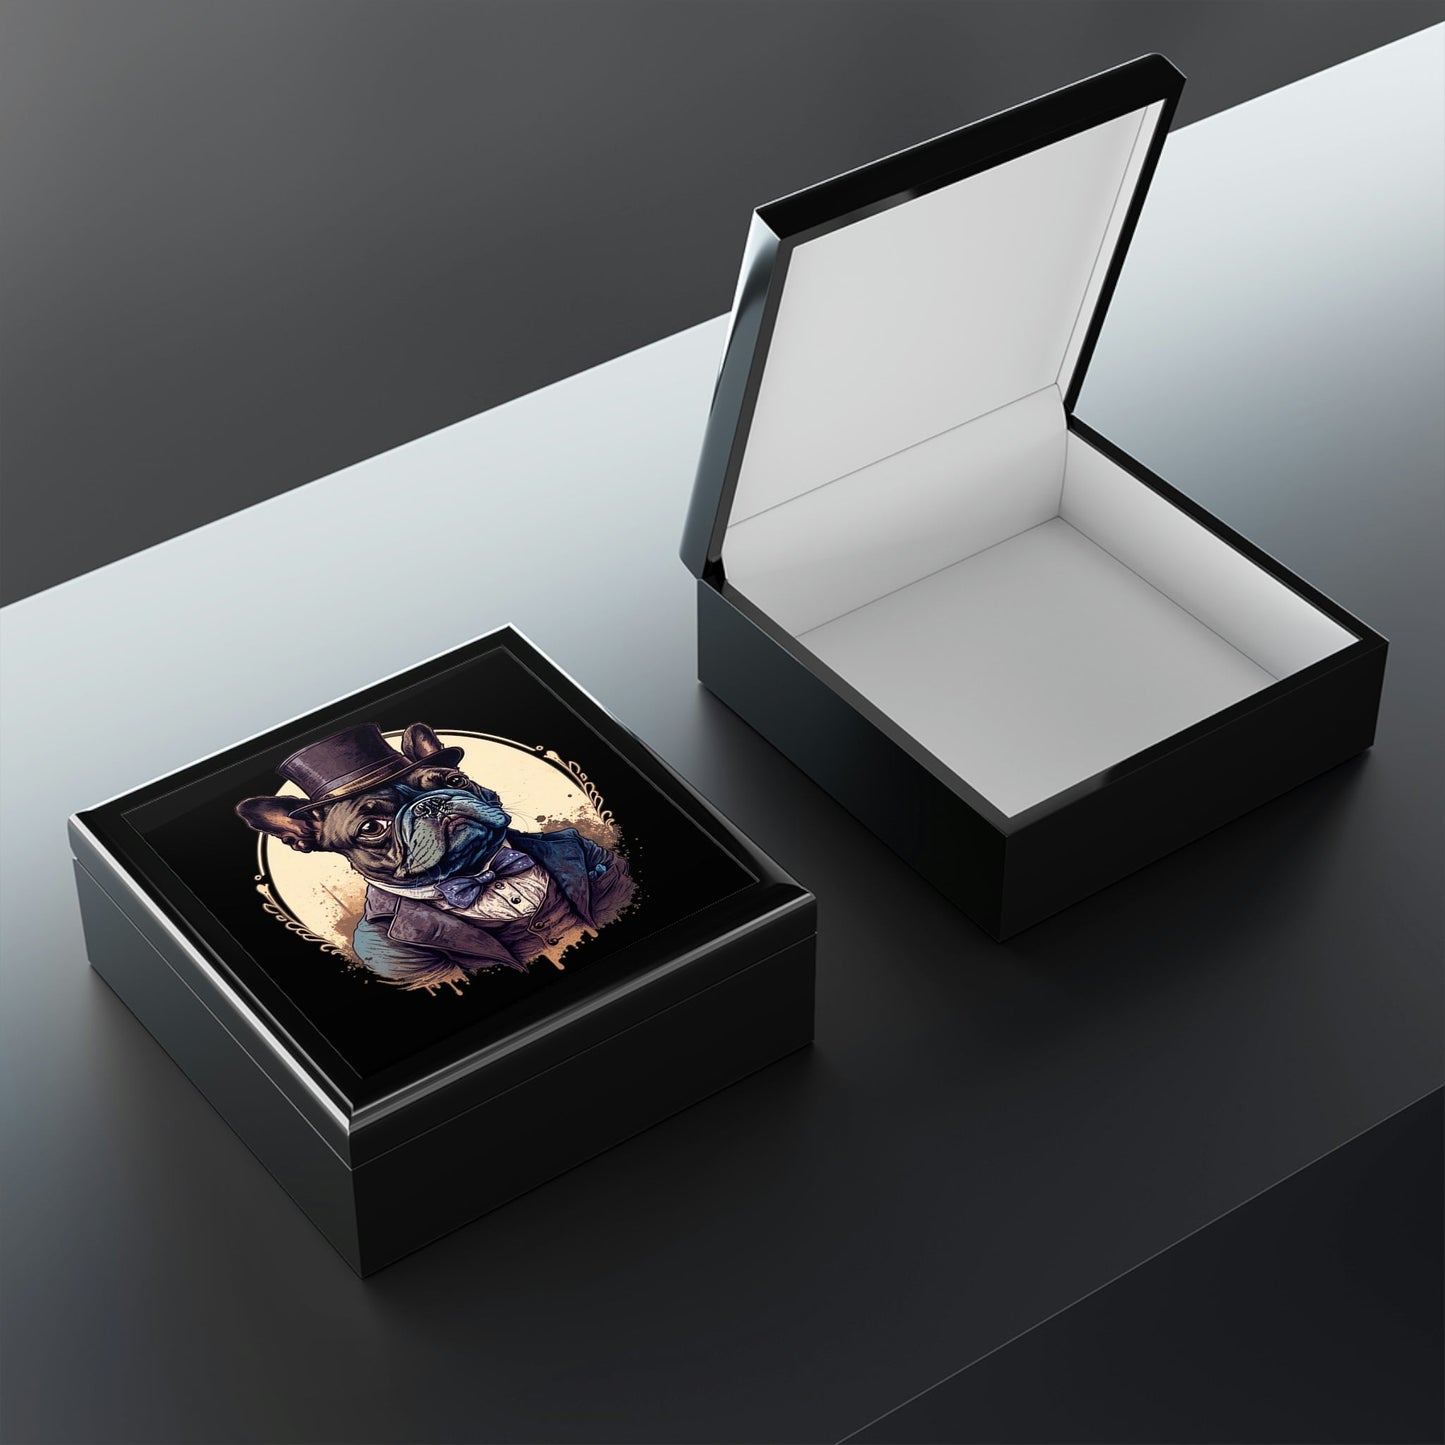 French Bulldog Portrait Jewelry Keepsake Box II - a perfect gift for the frenchy lover or any bull dog fan